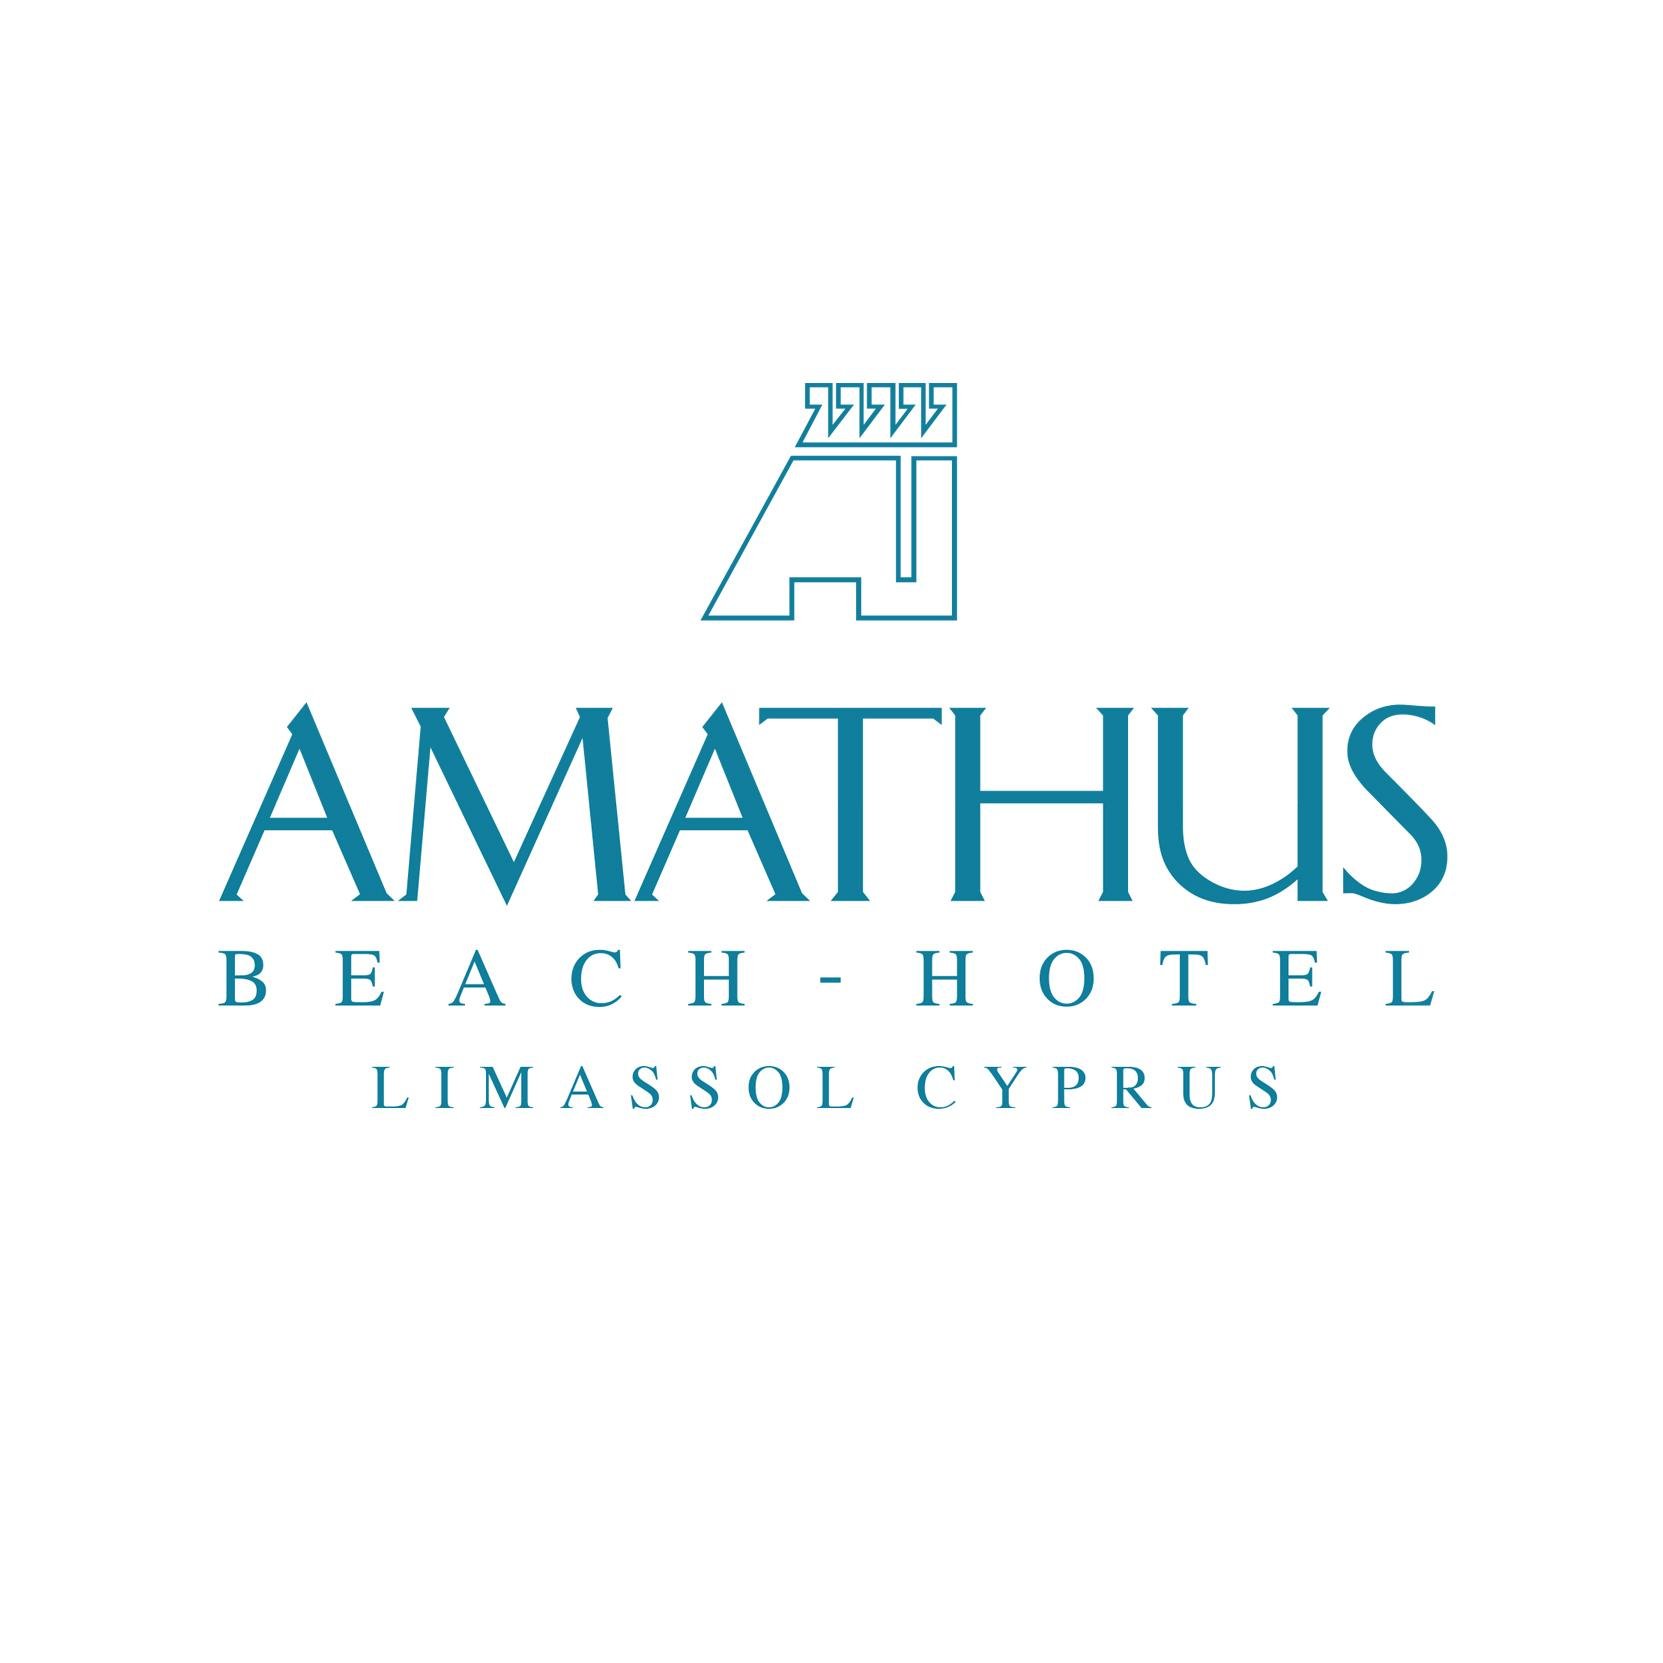 Welcome to the Amathus world
Member of the Leading Hotels of the World
Allow us to inspire you with a collection of #AmathusMoments.